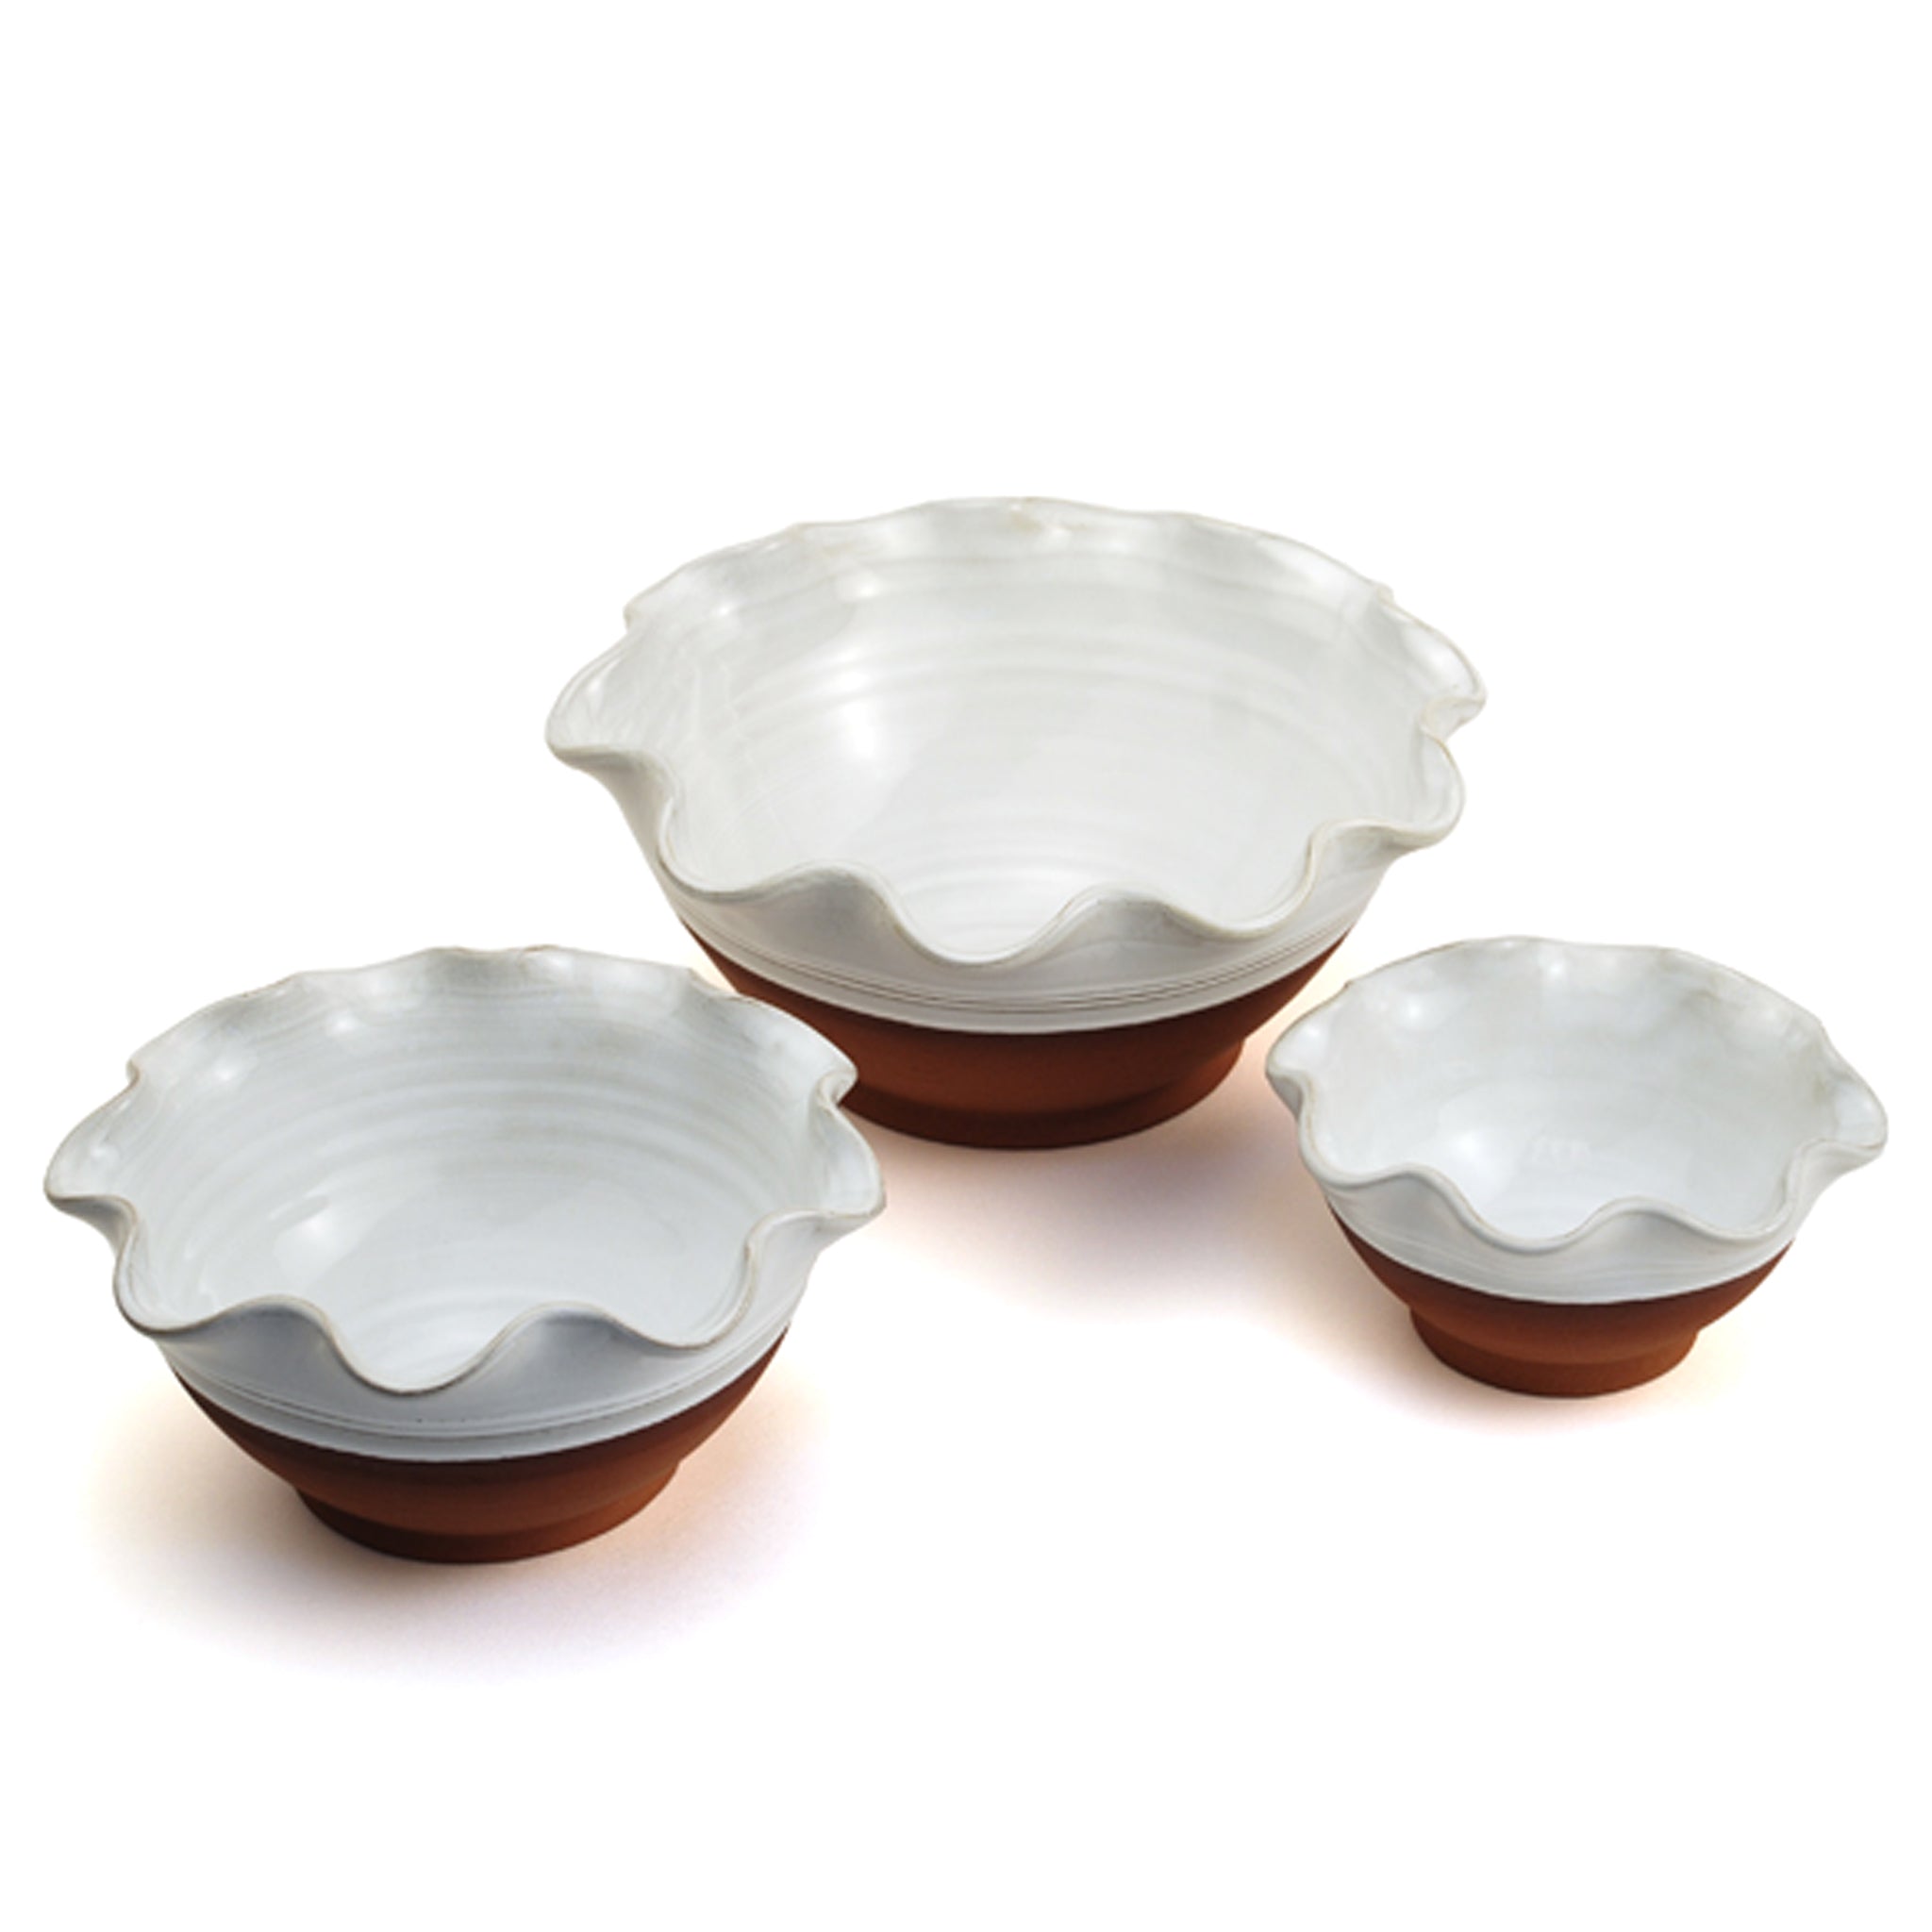 Set of Classic Curly Bowls